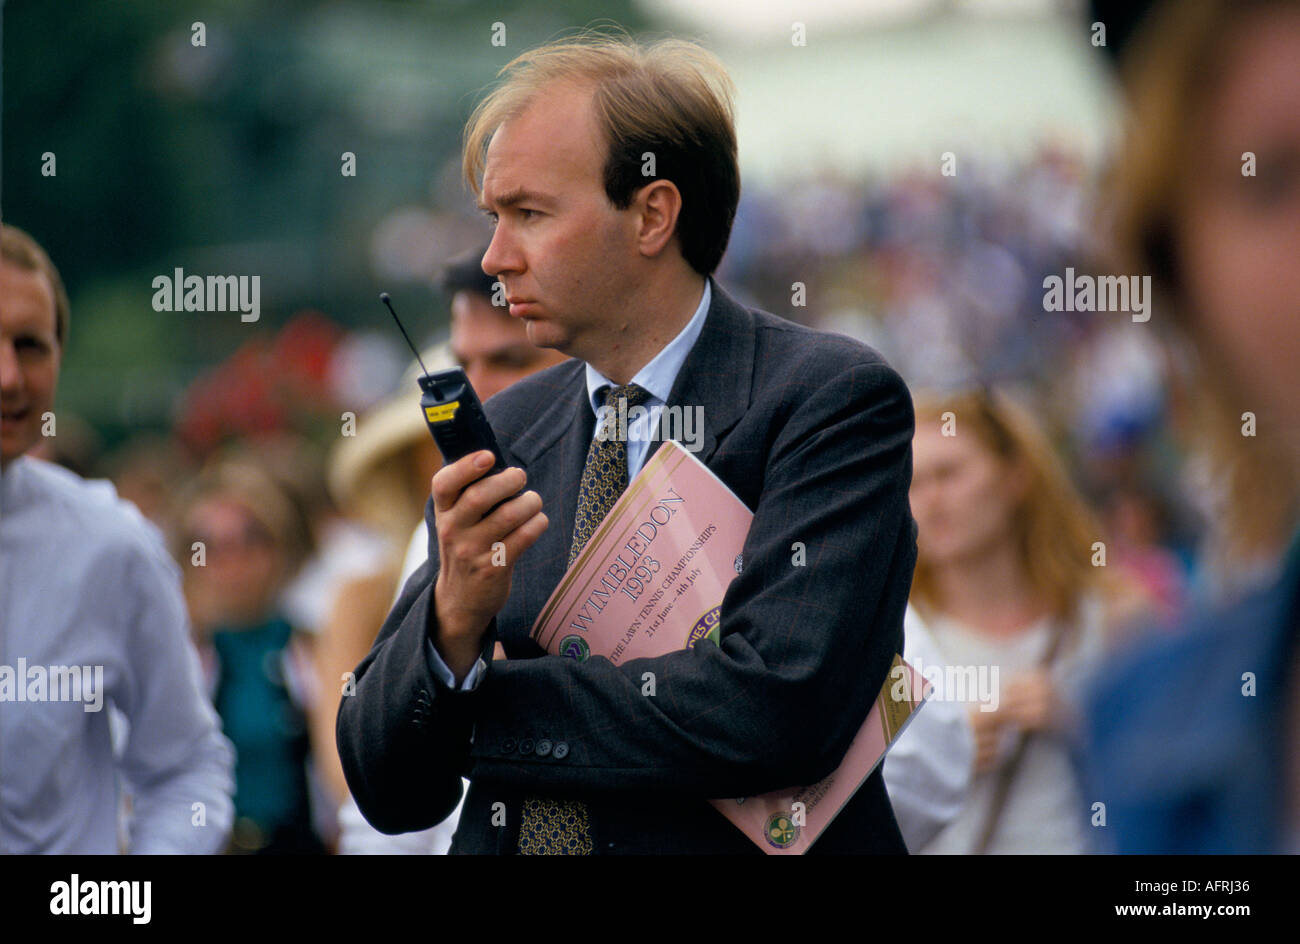 Man holding old style mobile cell phone phones 1990s at Wimbledon Lawn Tennis Club during the championships 1993 UK HOMER SYKES Stock Photo